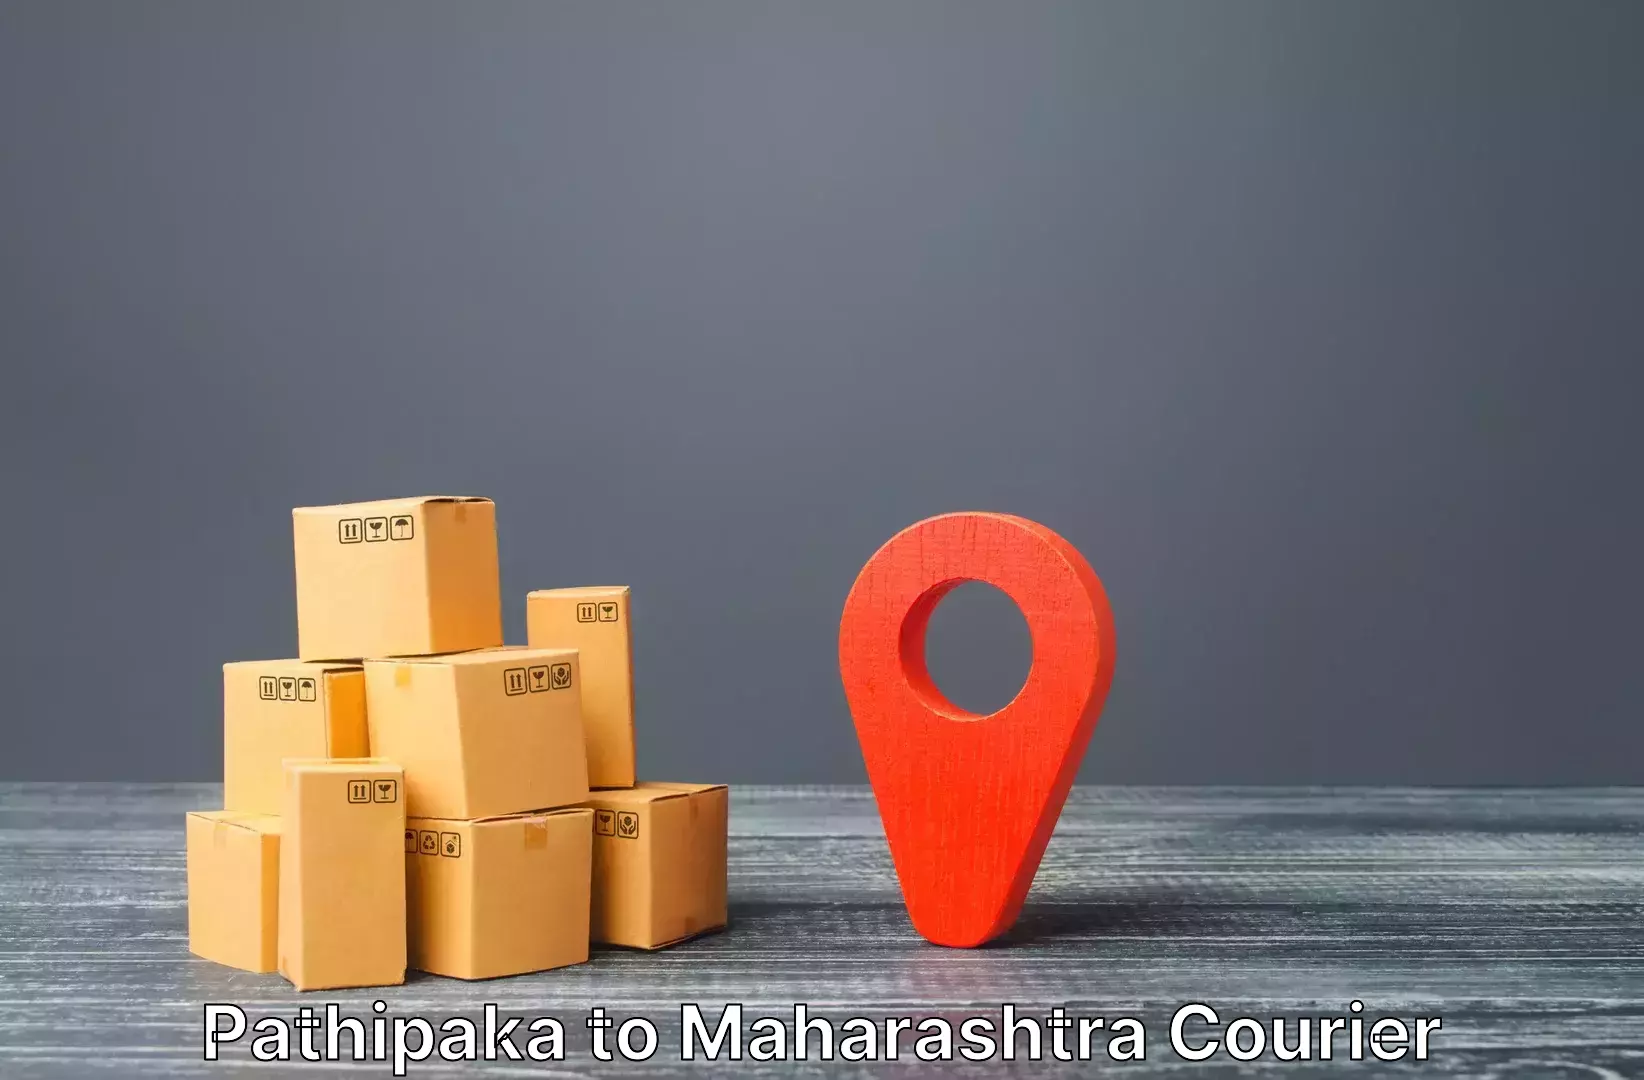 Luggage delivery app Pathipaka to Chandwad